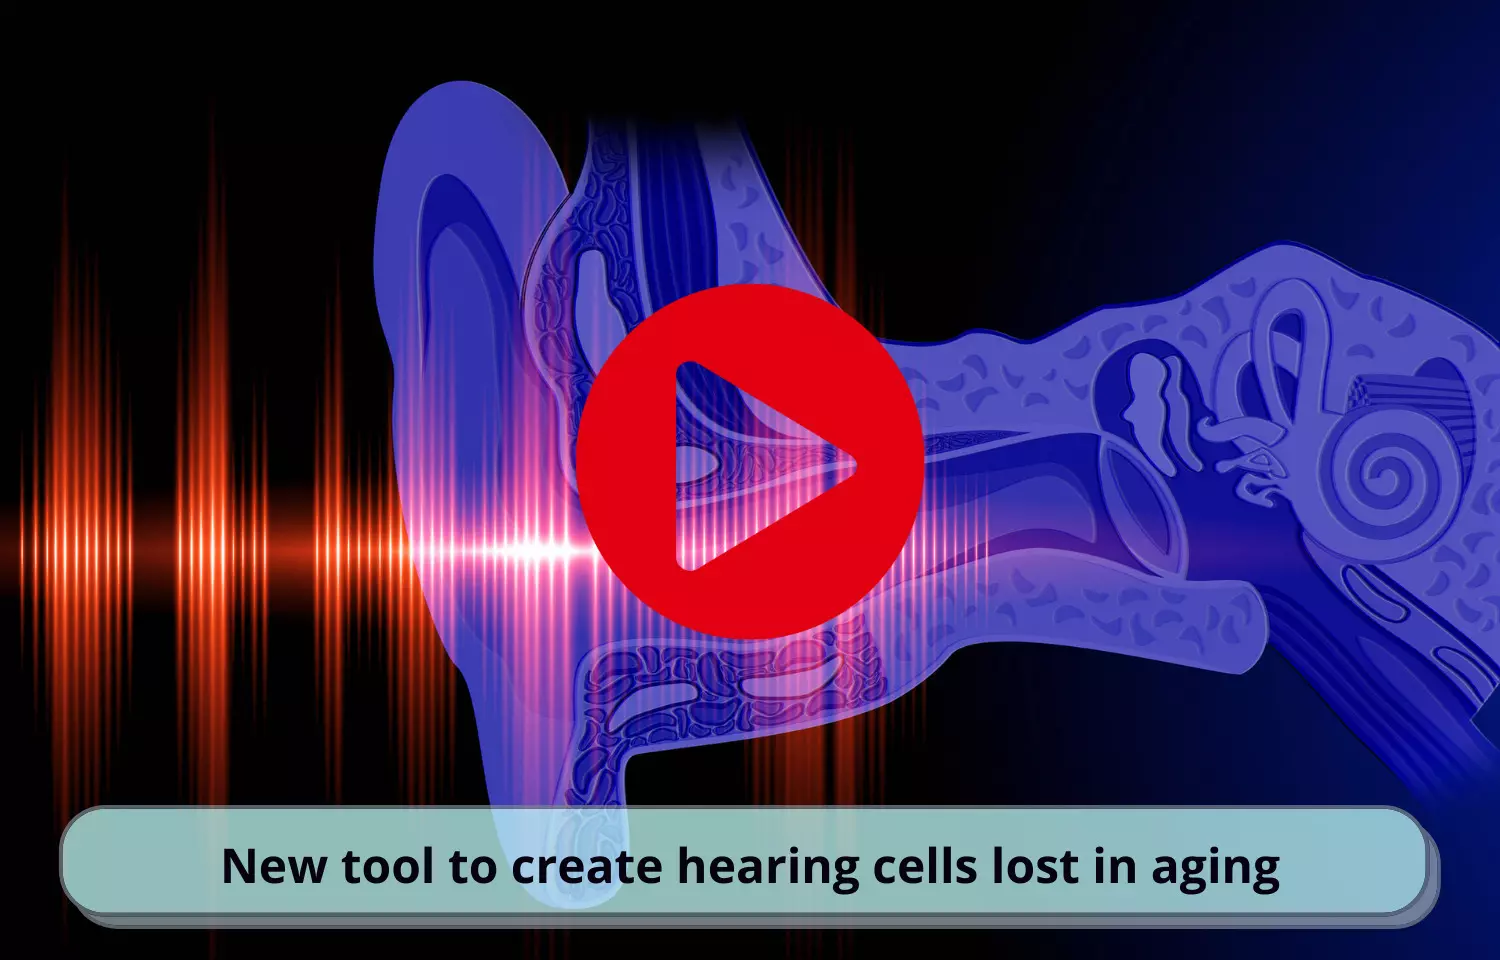 Journal Club - New tool to create hearing cells lost in aging